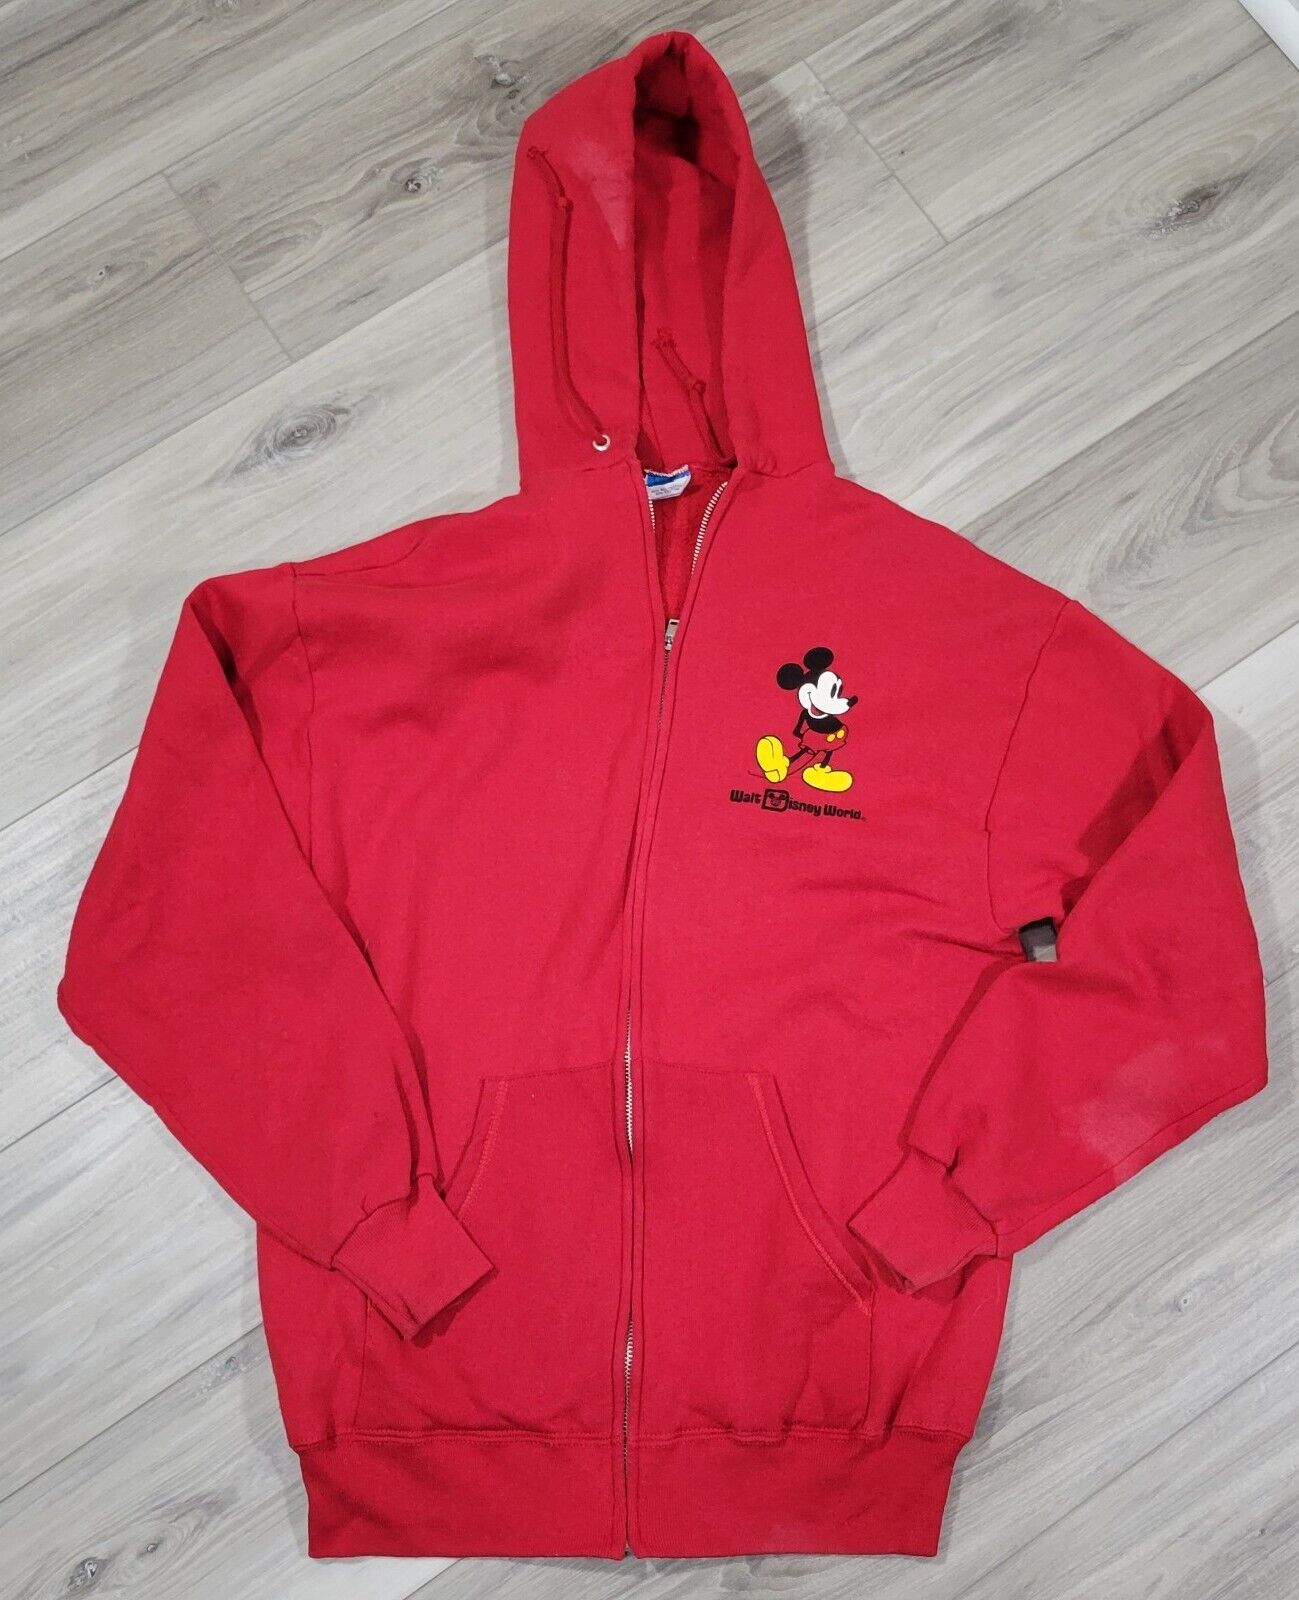 Vintage Disney Mickey Mouse Sweater Mens Large Red Adult Hooded Sweatshirt USA